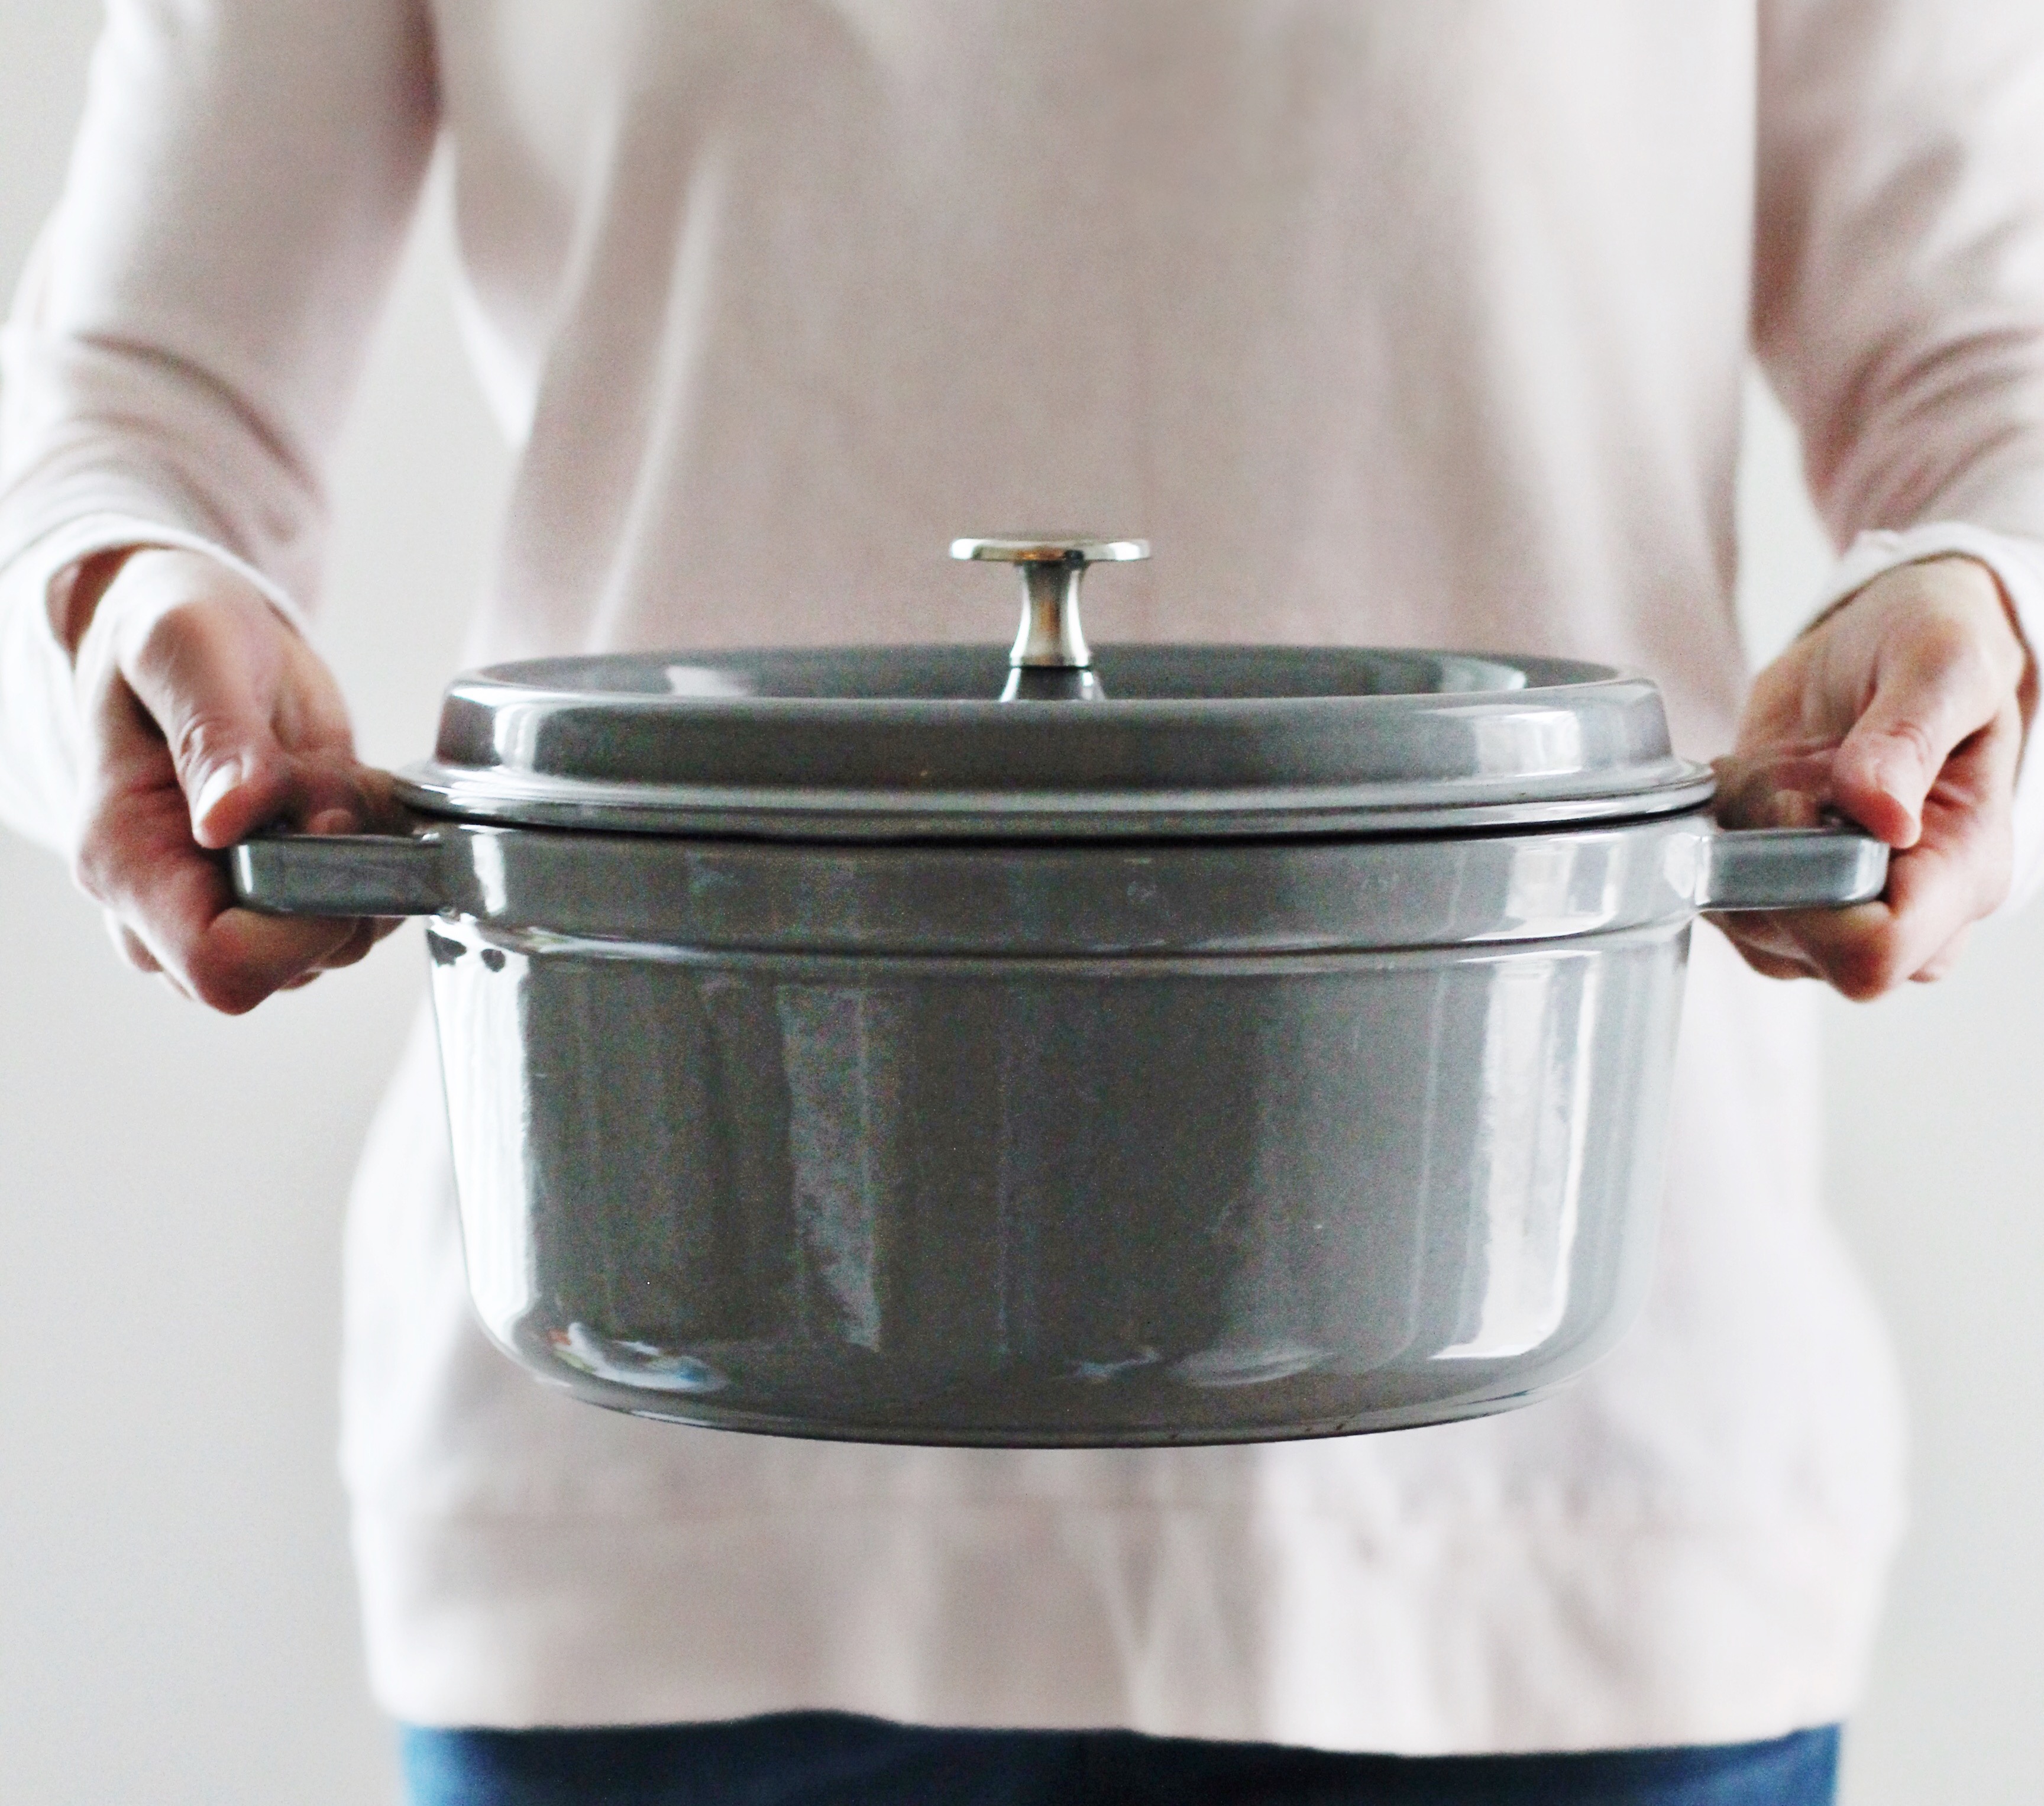 Staub Cocotte Mother's Day Giveaway